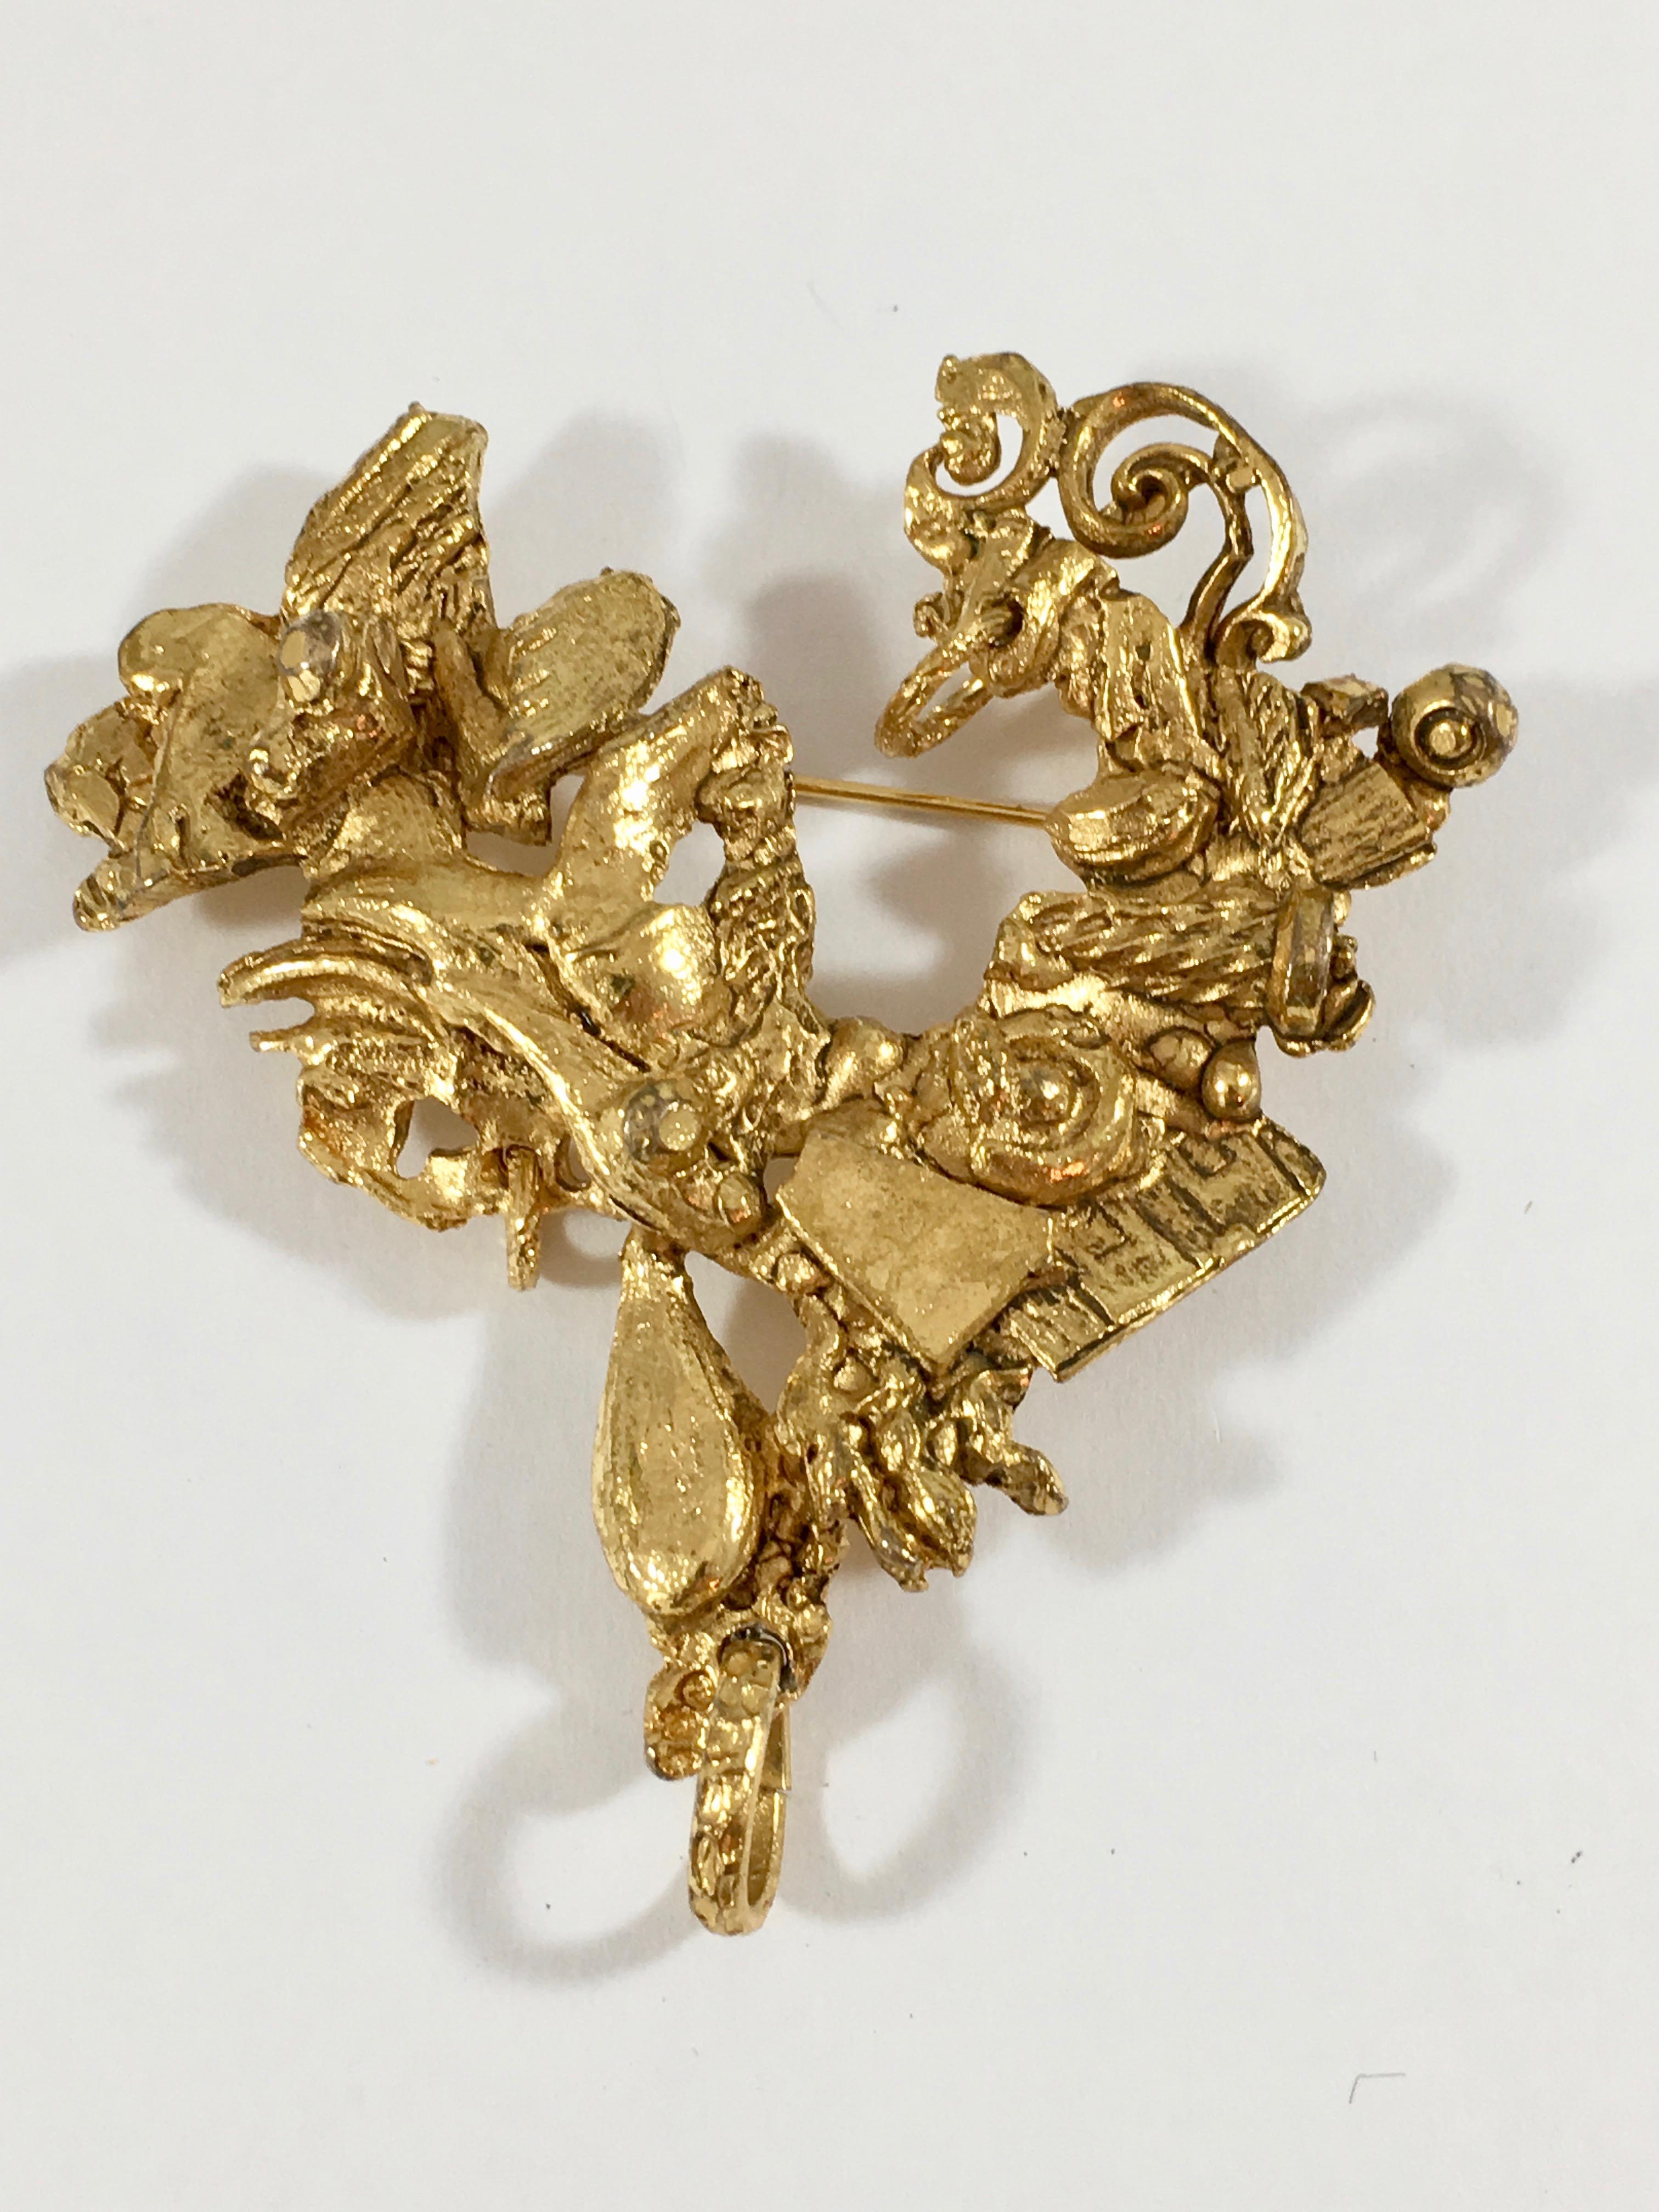 This is a goldtone abstract Christian LaCroix heart brooch from the 1990s.  It measures 3 inches long x 2 3/4 inches wide and is marked 'Christian LaCroix Made in France' on the back of the brooch. It is in excellent condition.